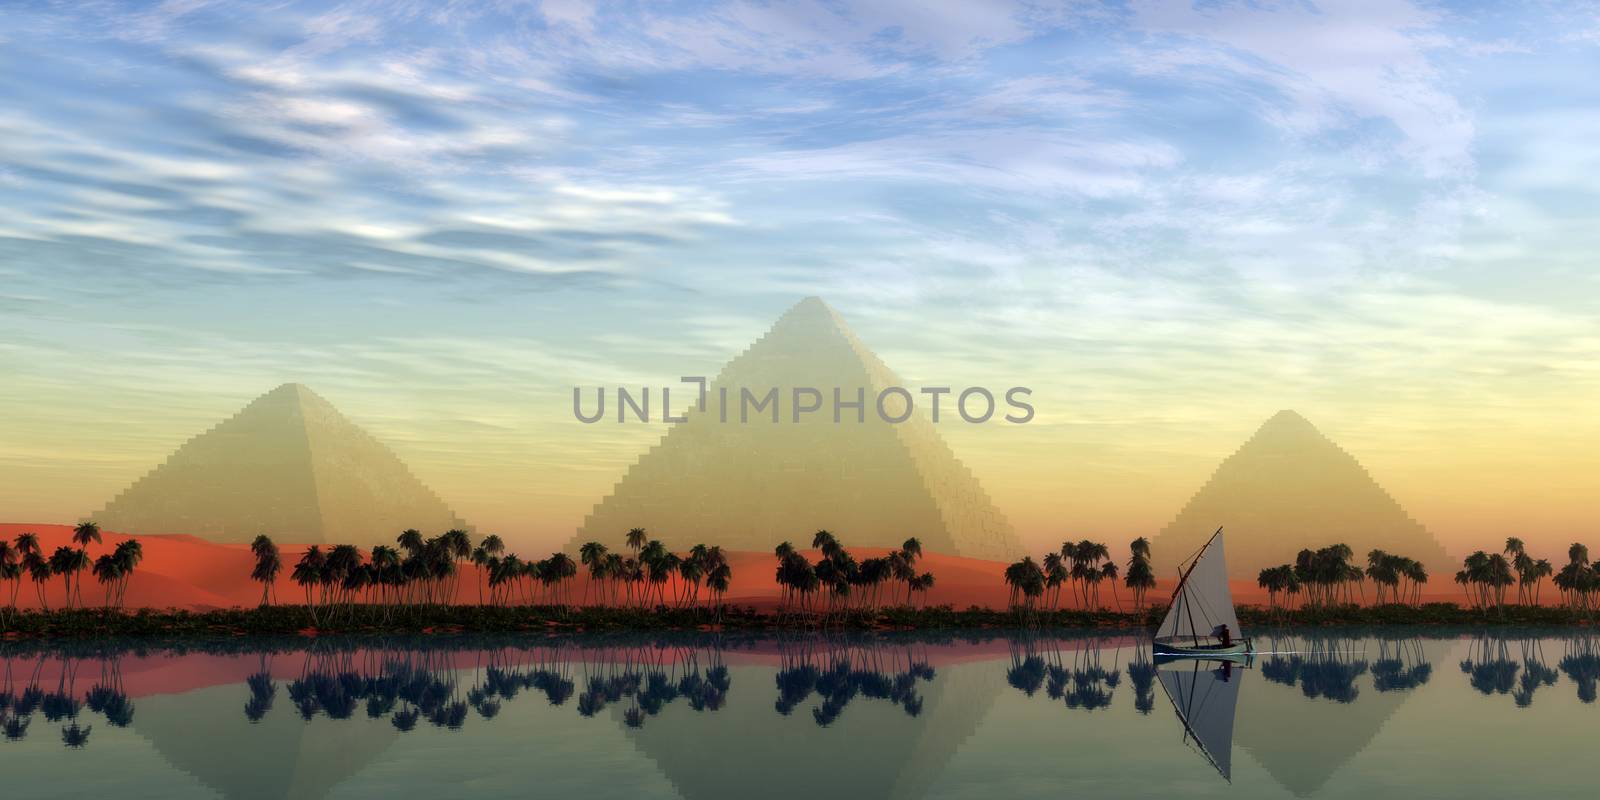 The Great Pyramids stand majestically over the Nile River running through the land of Egypt.